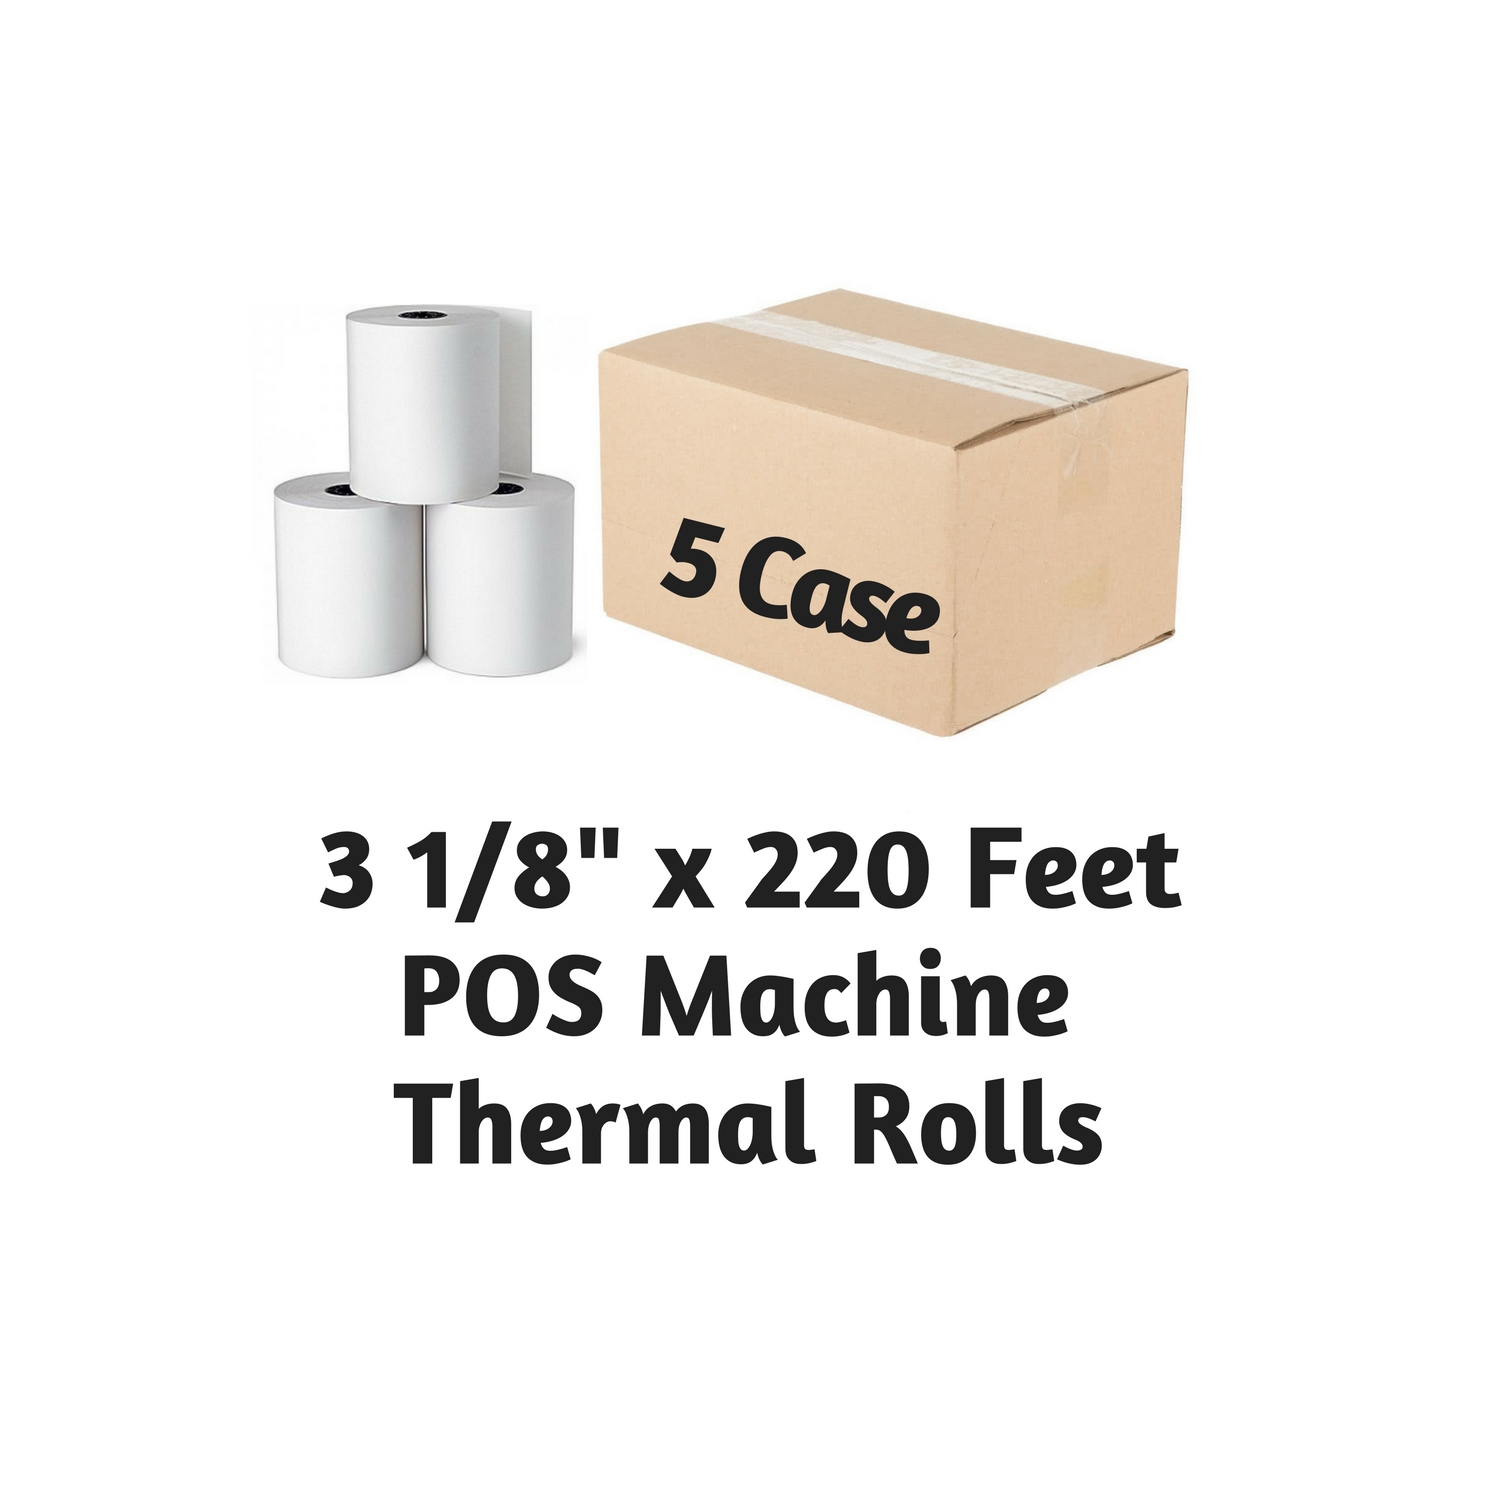 3 1/8" x 225' Feet Thermal Paper Rolls (50 rolls/Case) 5 Cases - FREE SHIPPING POS MACHINE ROLLS